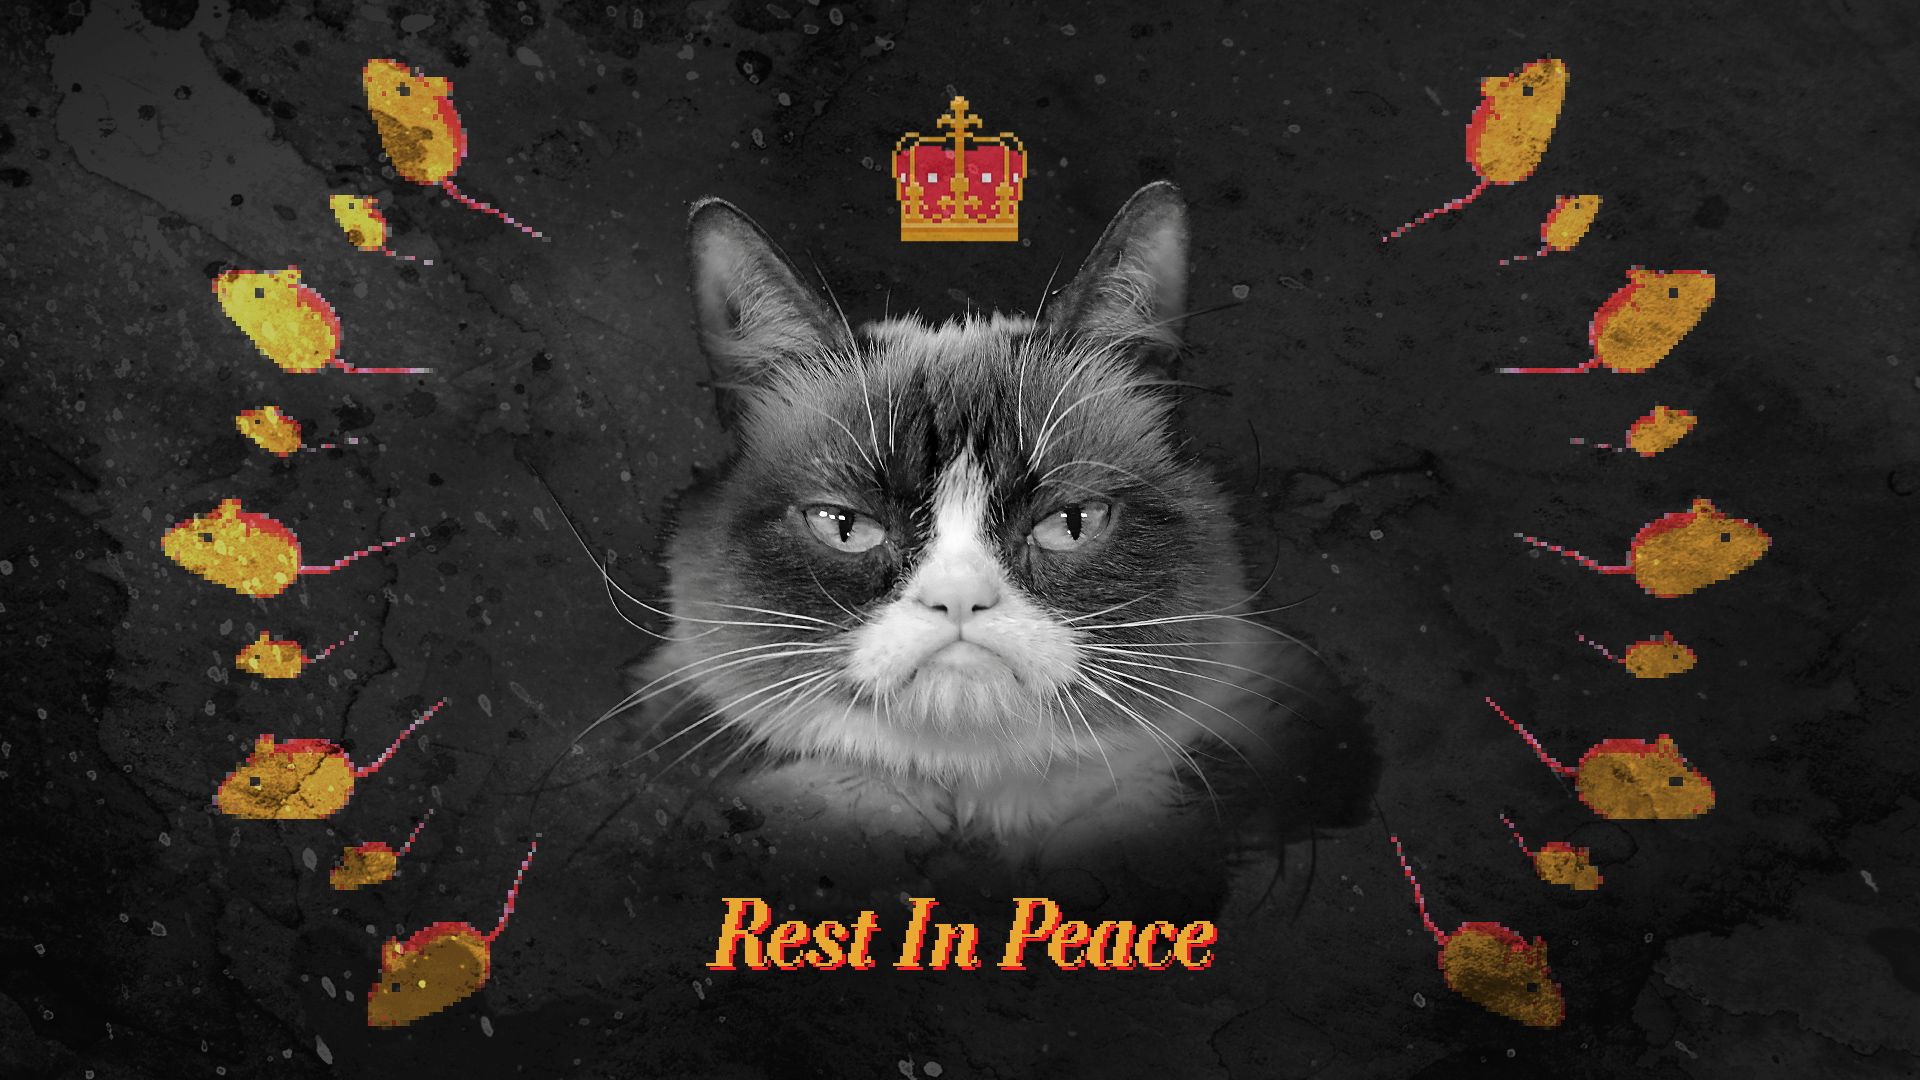 Grumpy Cat died from UTI complications after 7 years and millions of followers and memes Washington Post